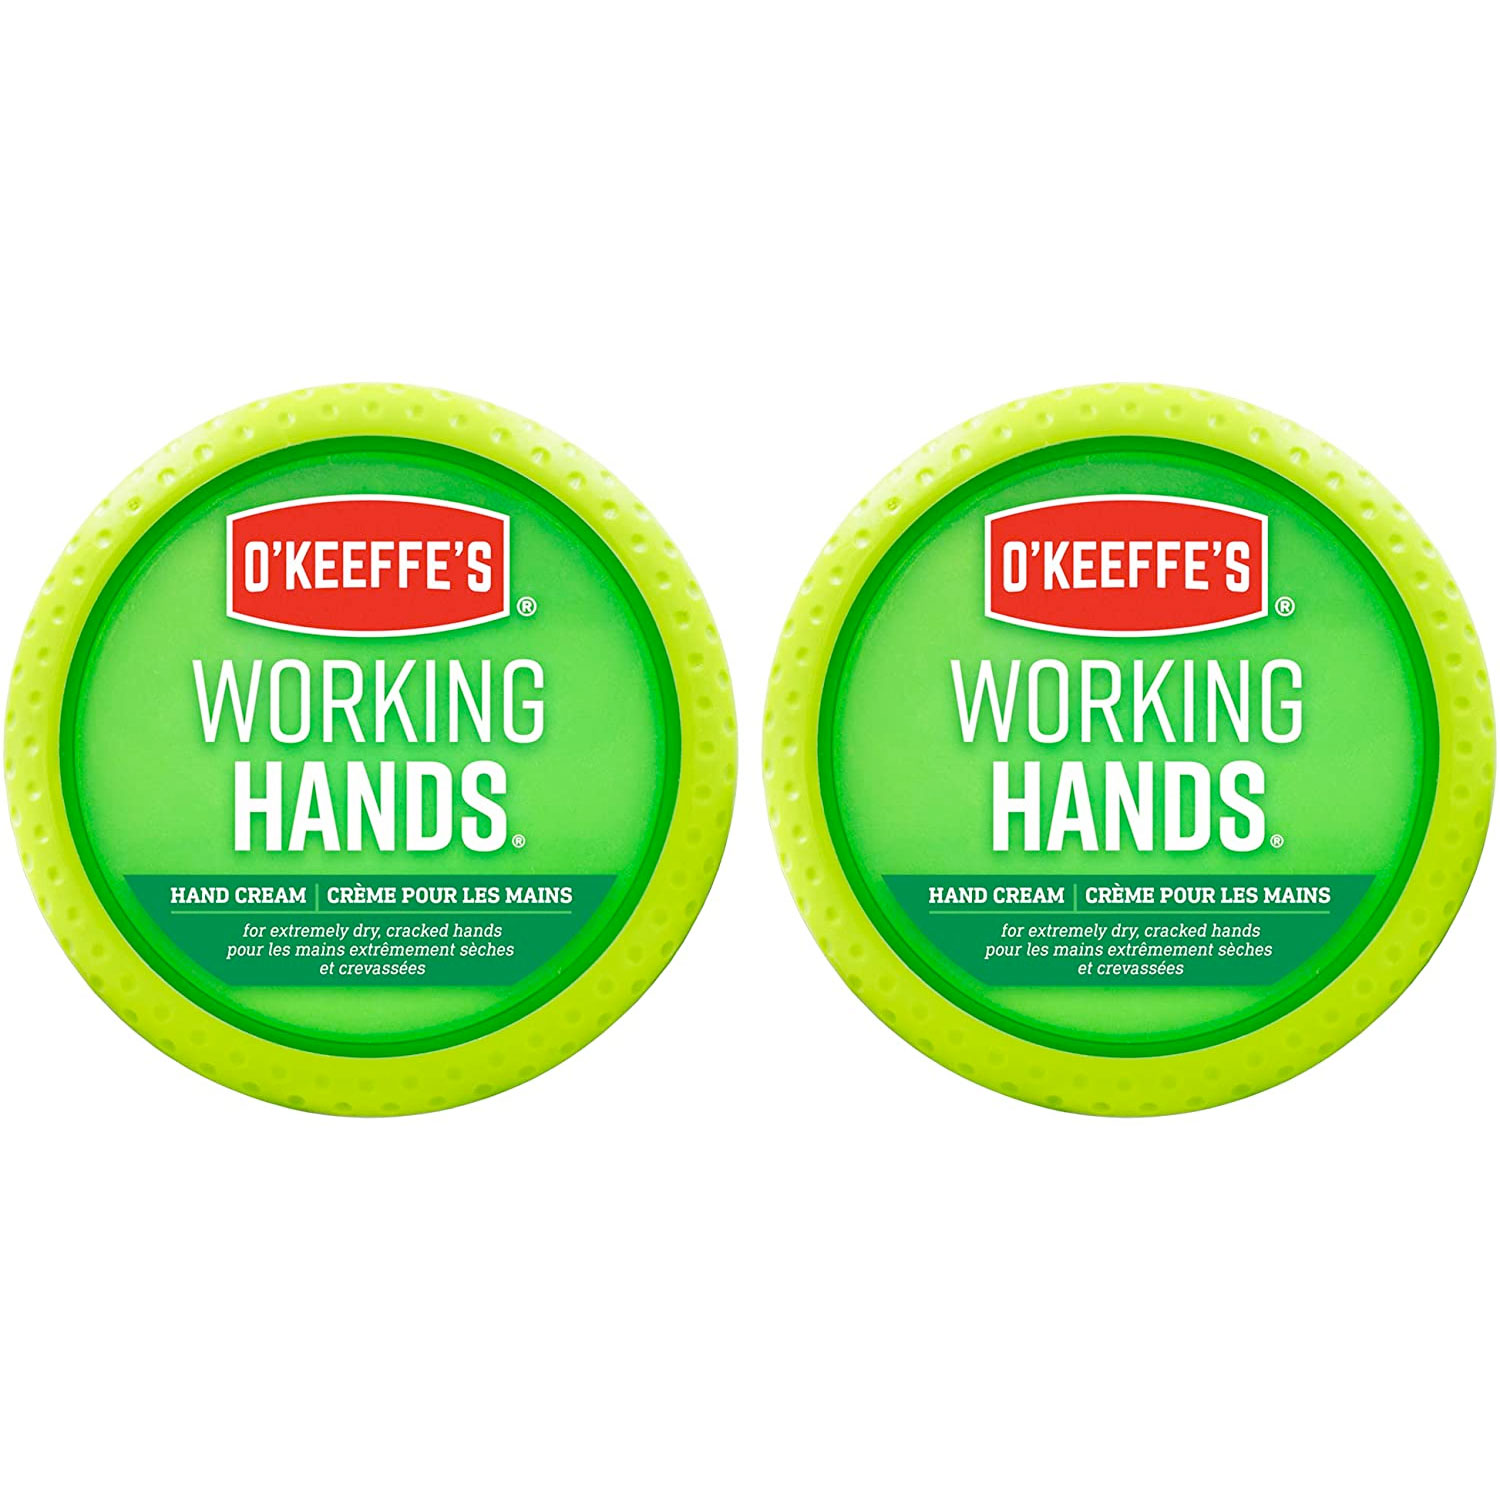 Amazon：O’Keeffe’s Working Hands Hand Cream(96g, Pack of 2)只卖$15.70